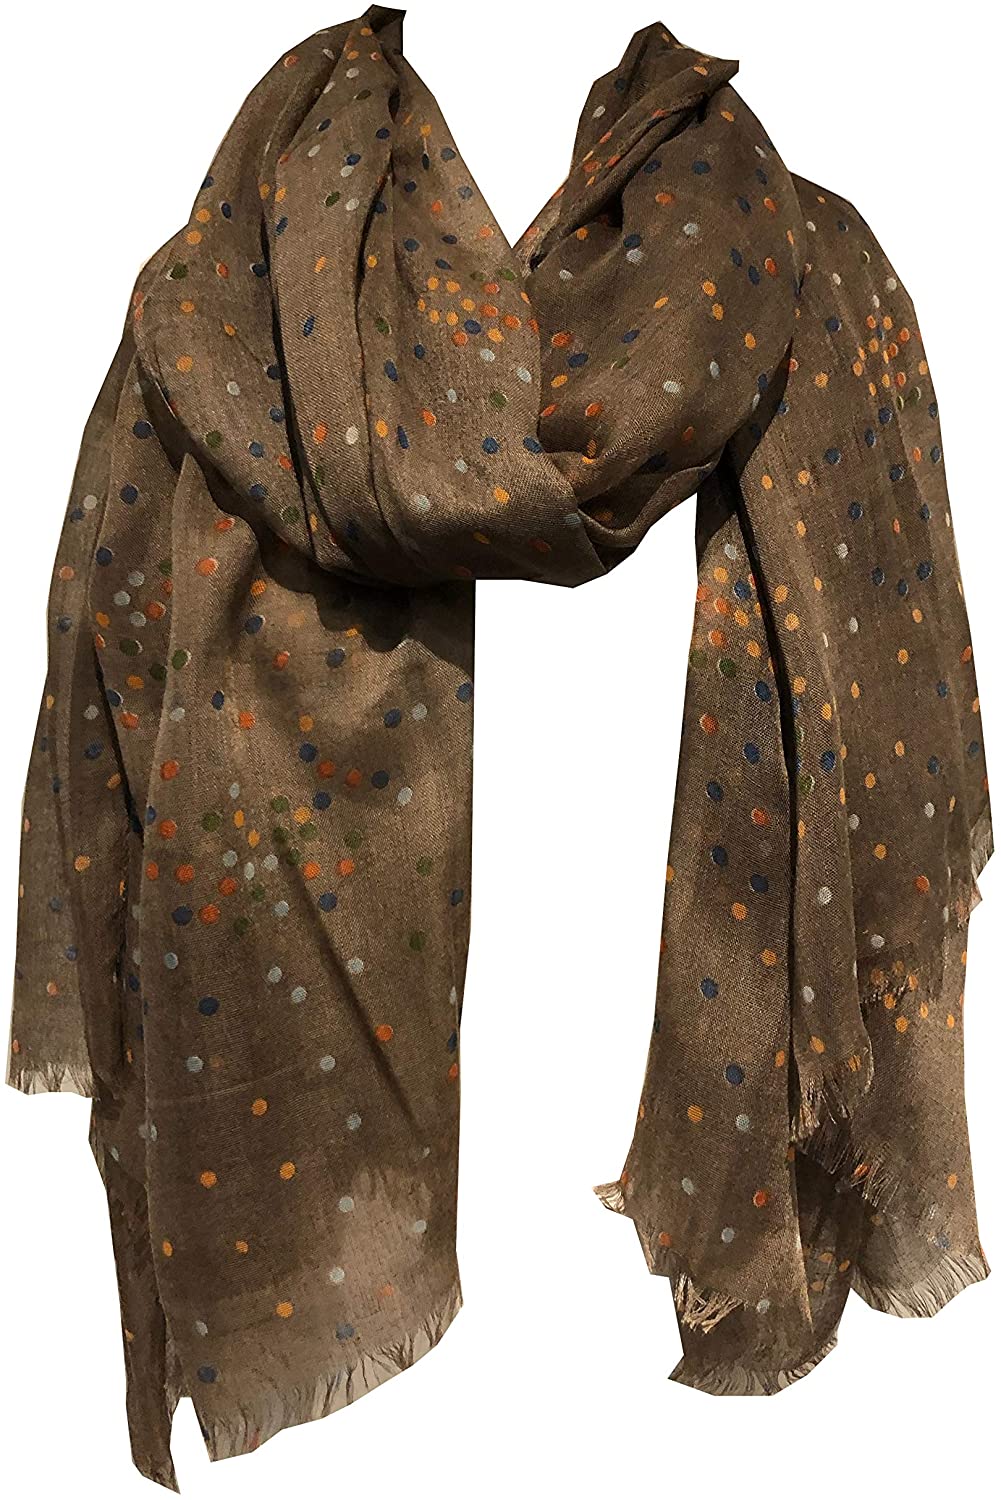 Pamper Yourself Now Dark Brown with Multi Coloured dots Scarf/wrap